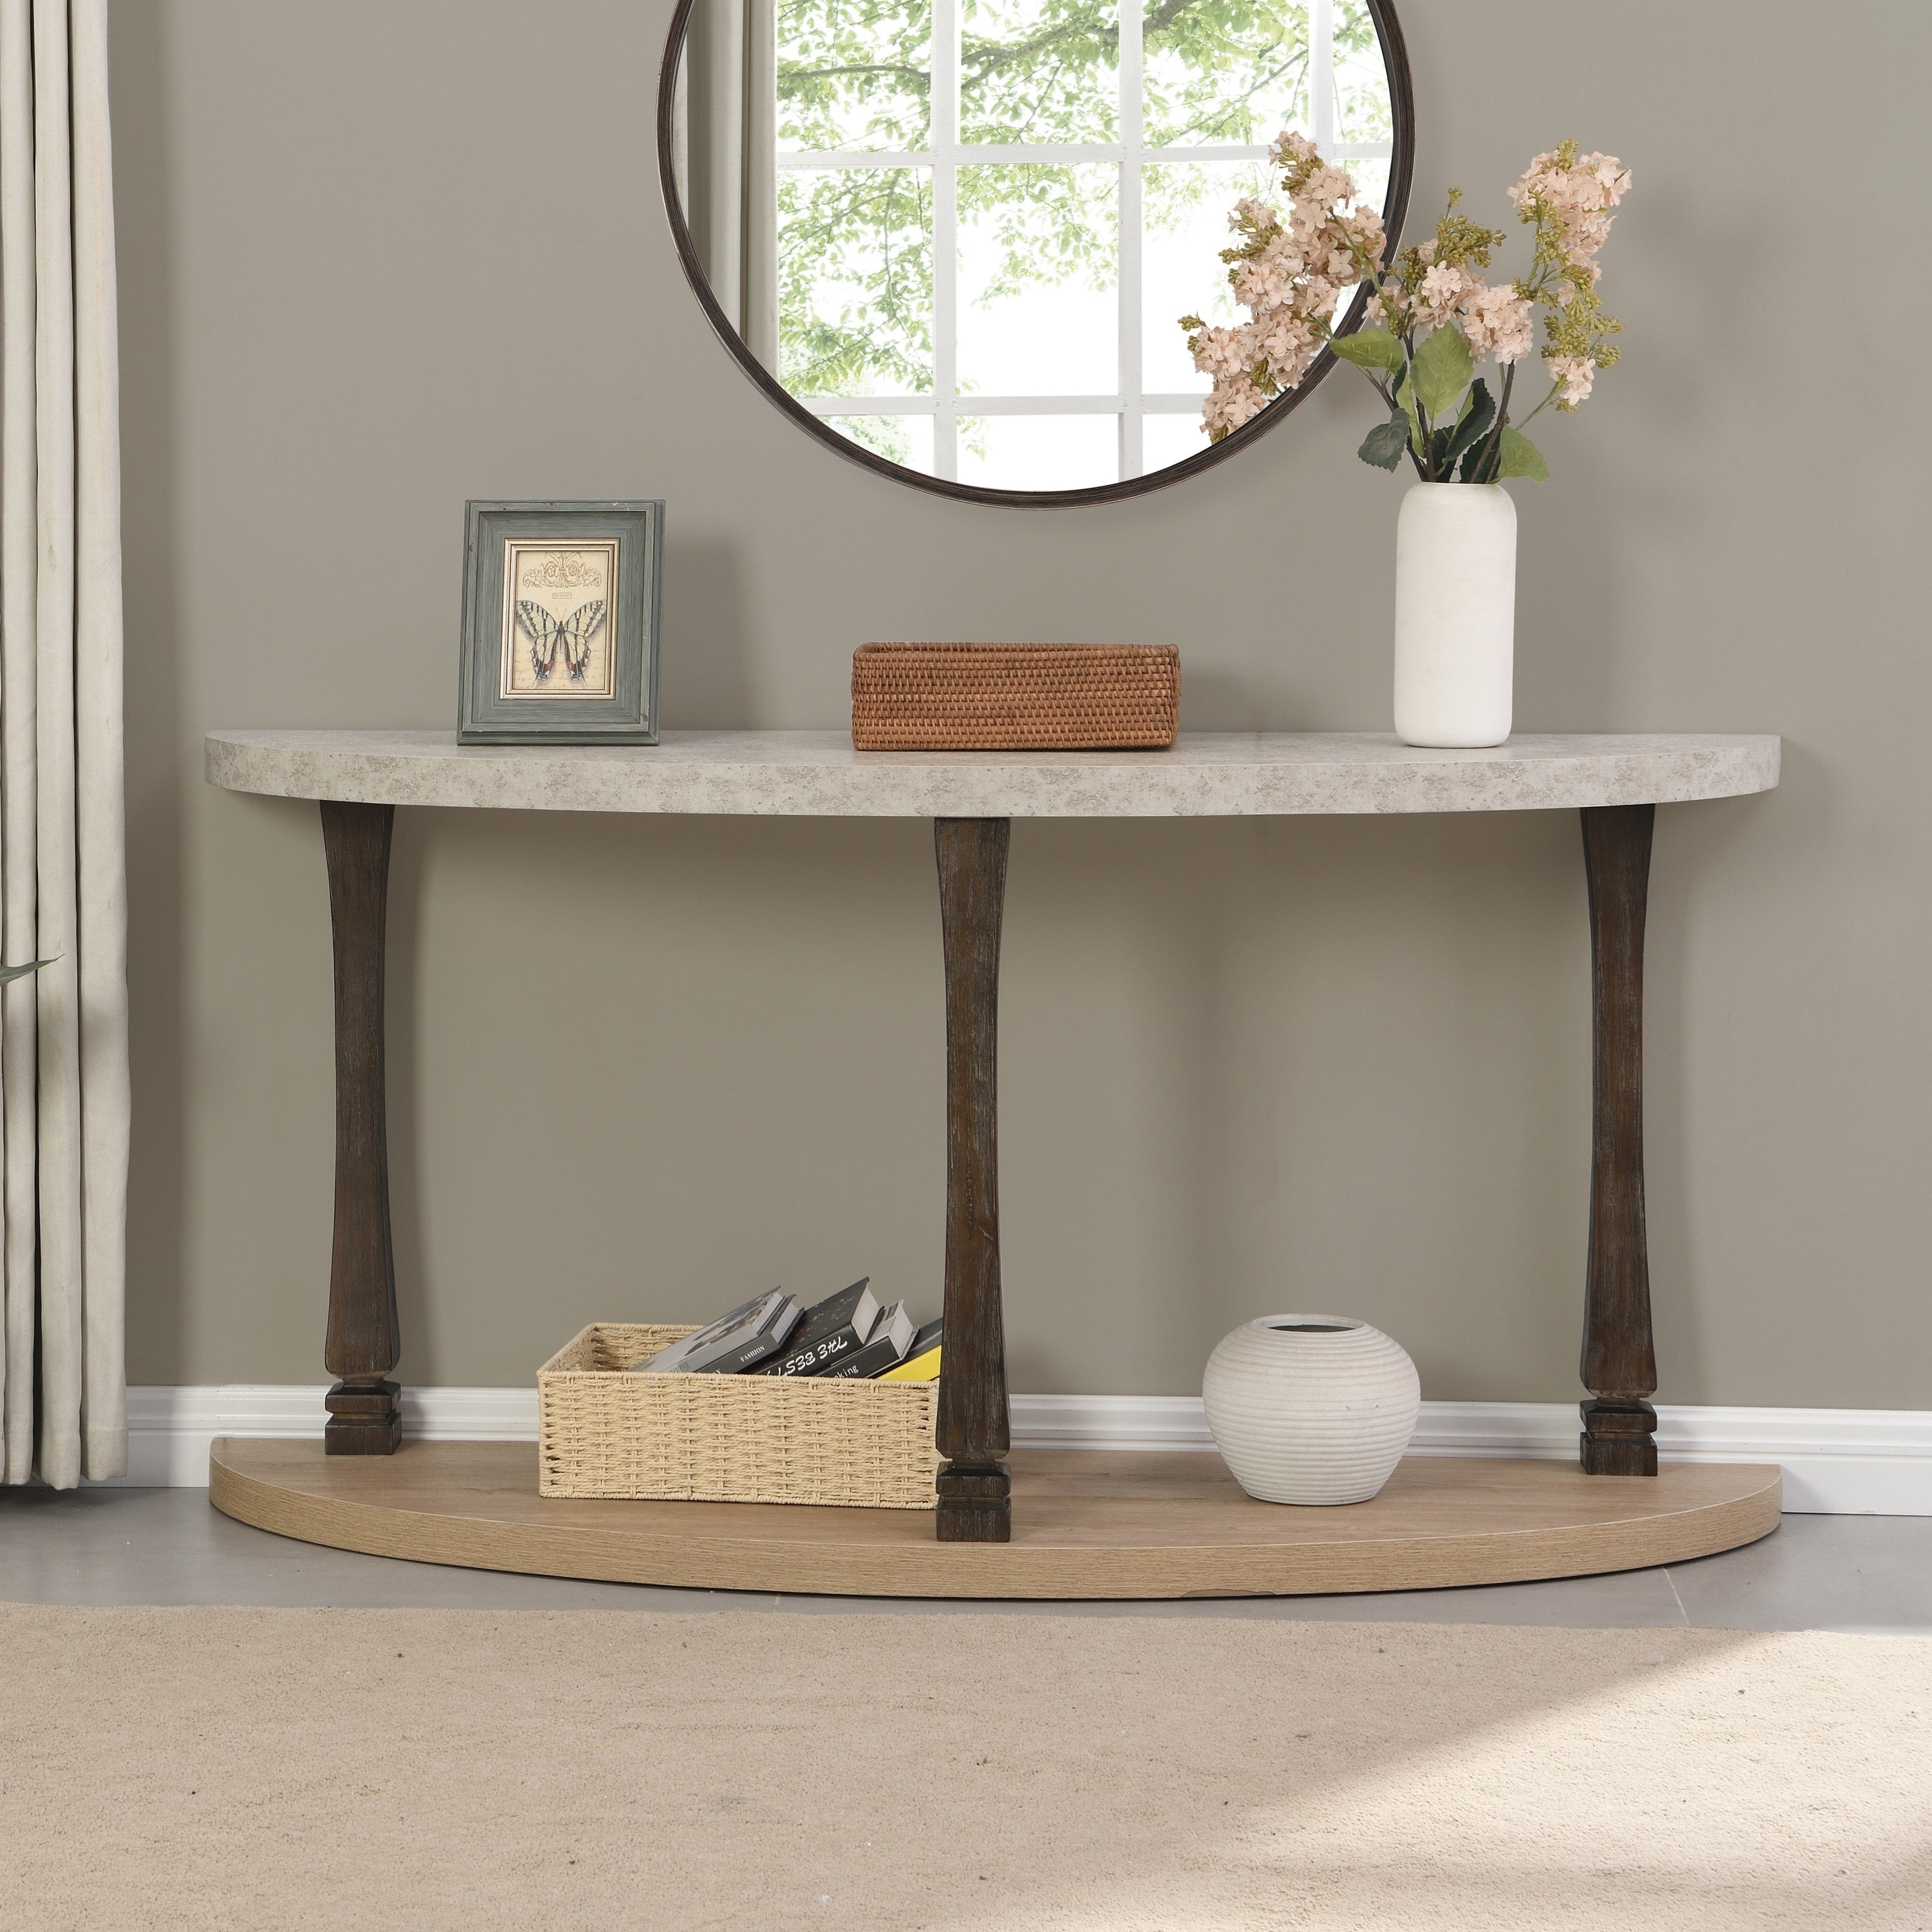 🆓🚛 60" Long Semi Circle Demilune Sofa Table for Small Hallway Entryway Space, Wooden Half Moon Sturdy Console Tables, Gray&Natural Colour